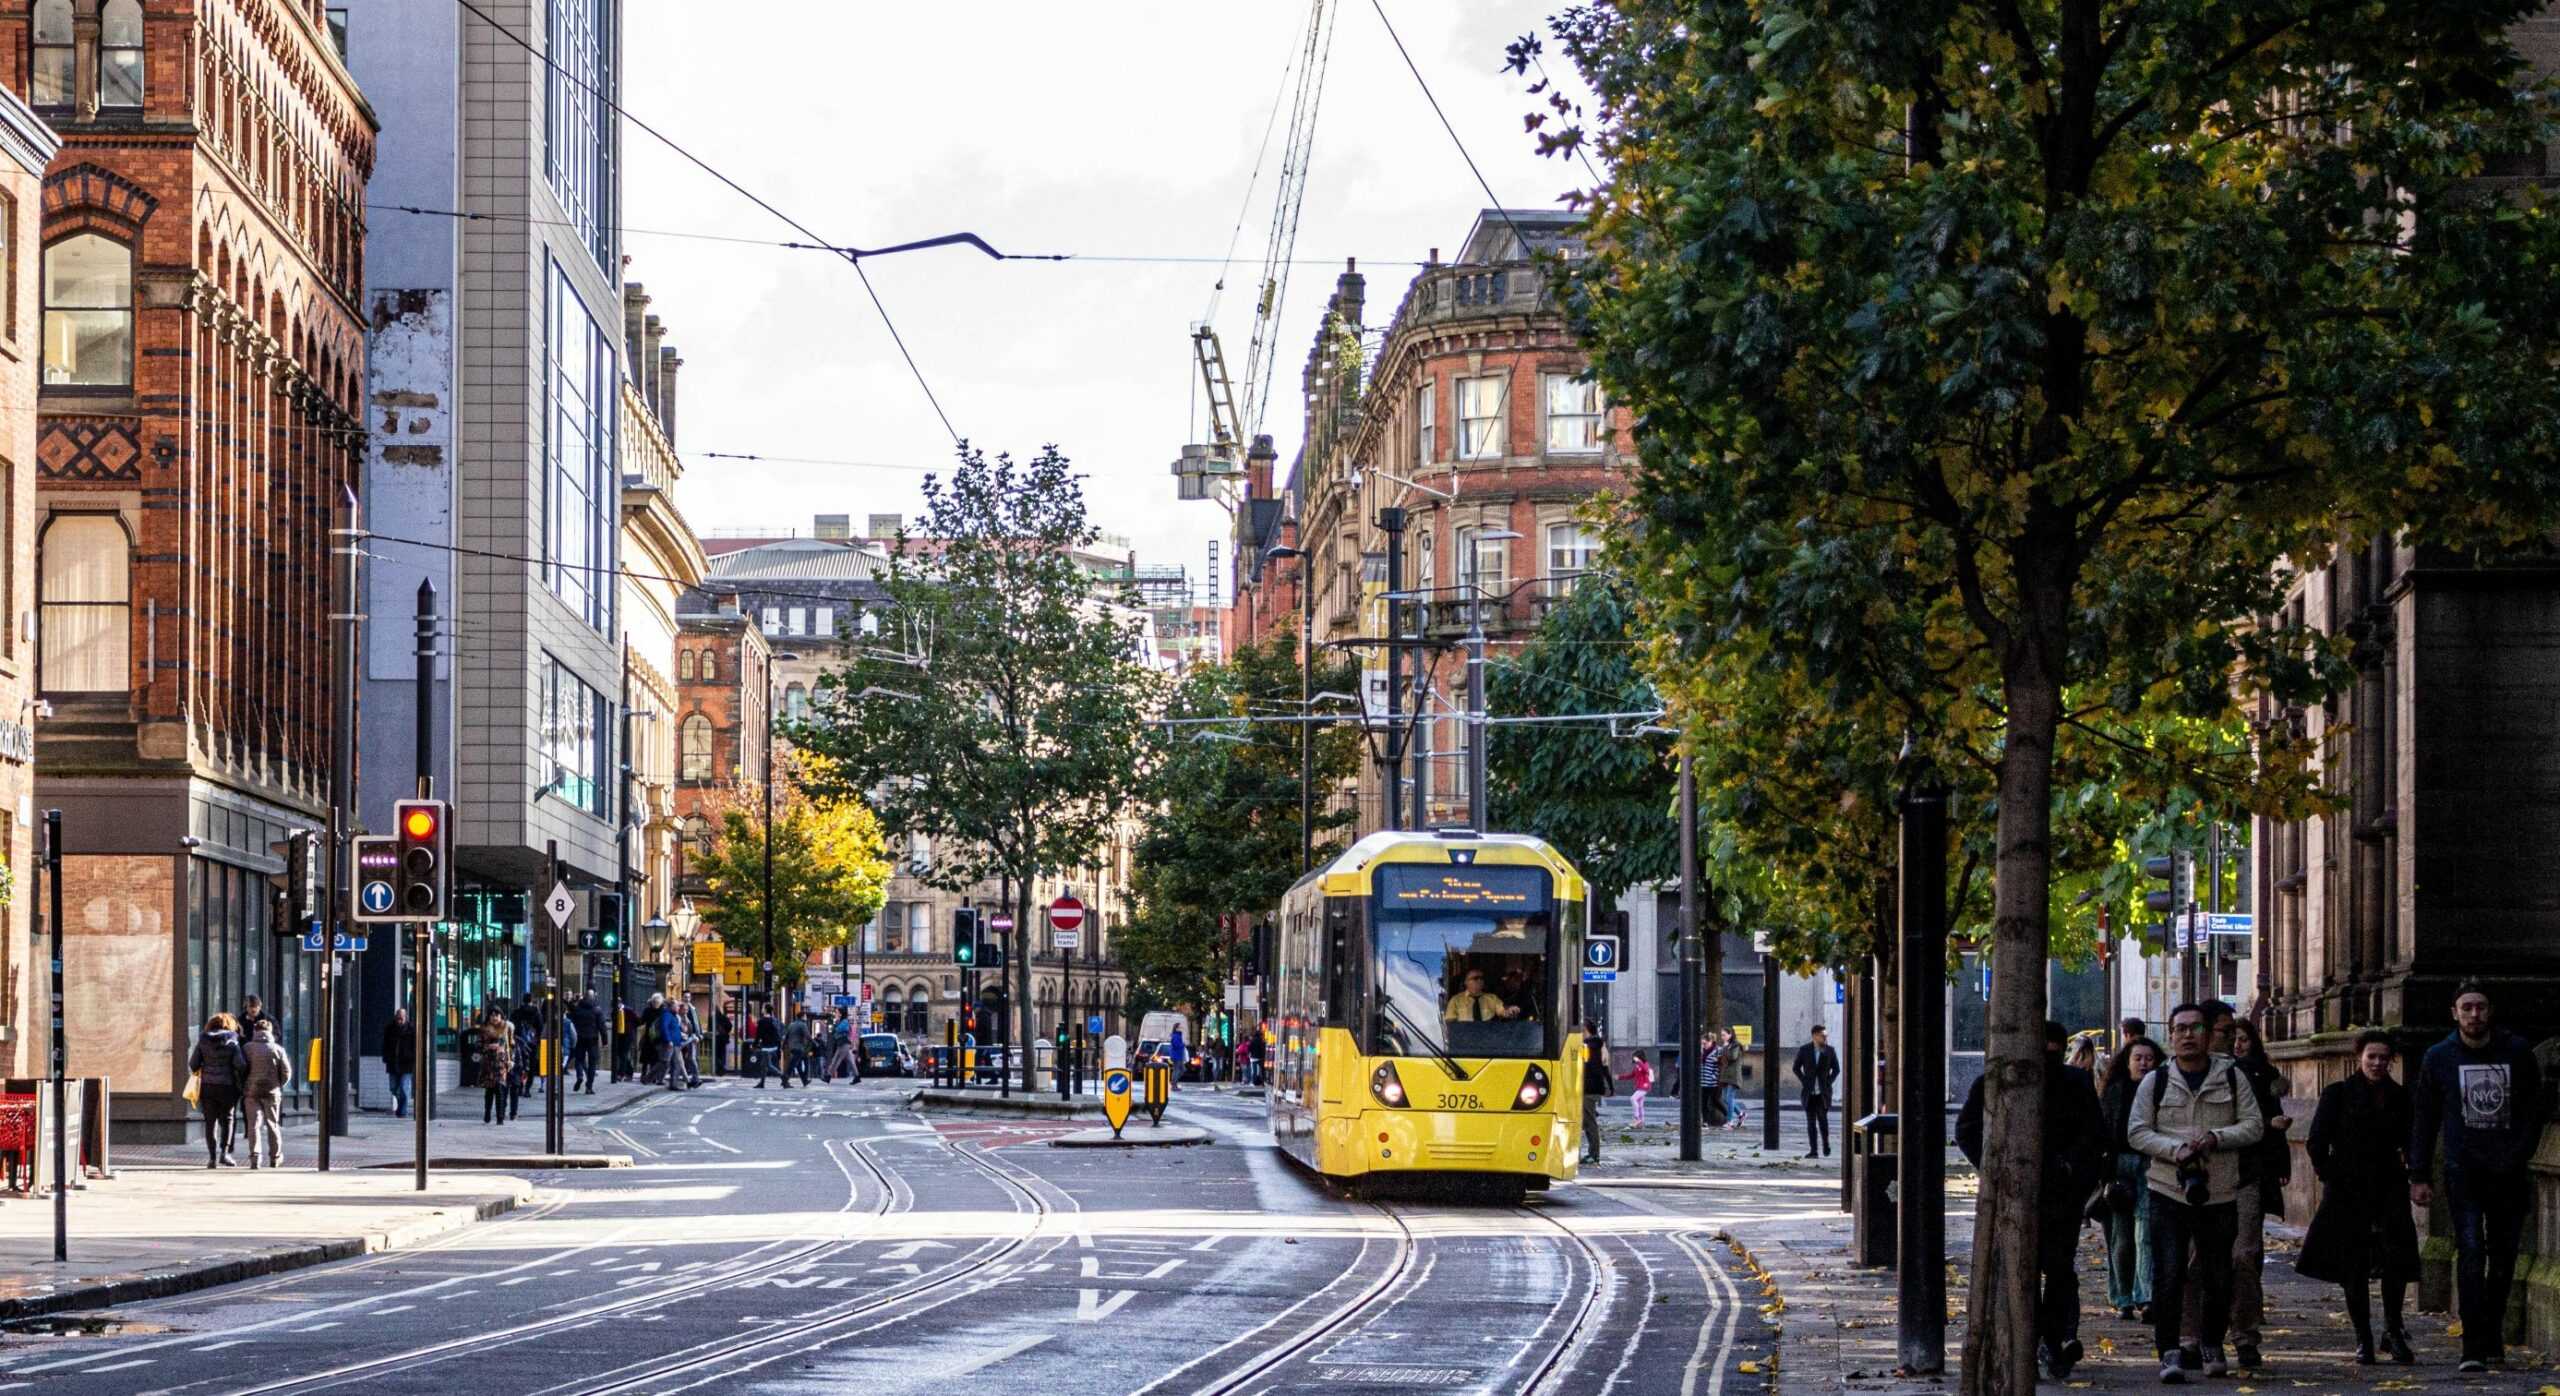 The city of Manchester and the passing tram